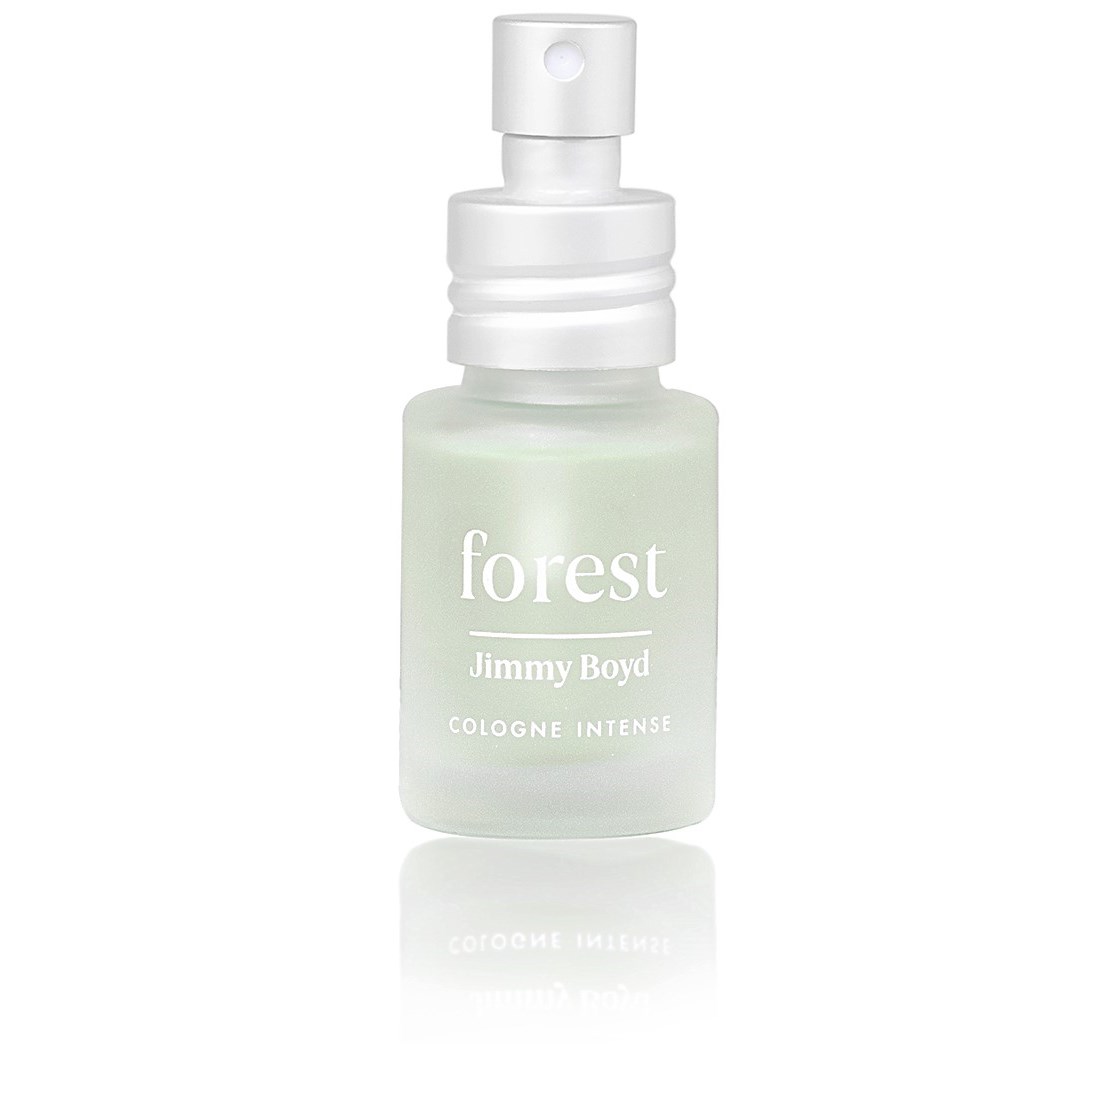 Jimmy Boyd Cologne Intense Forest 12 ml